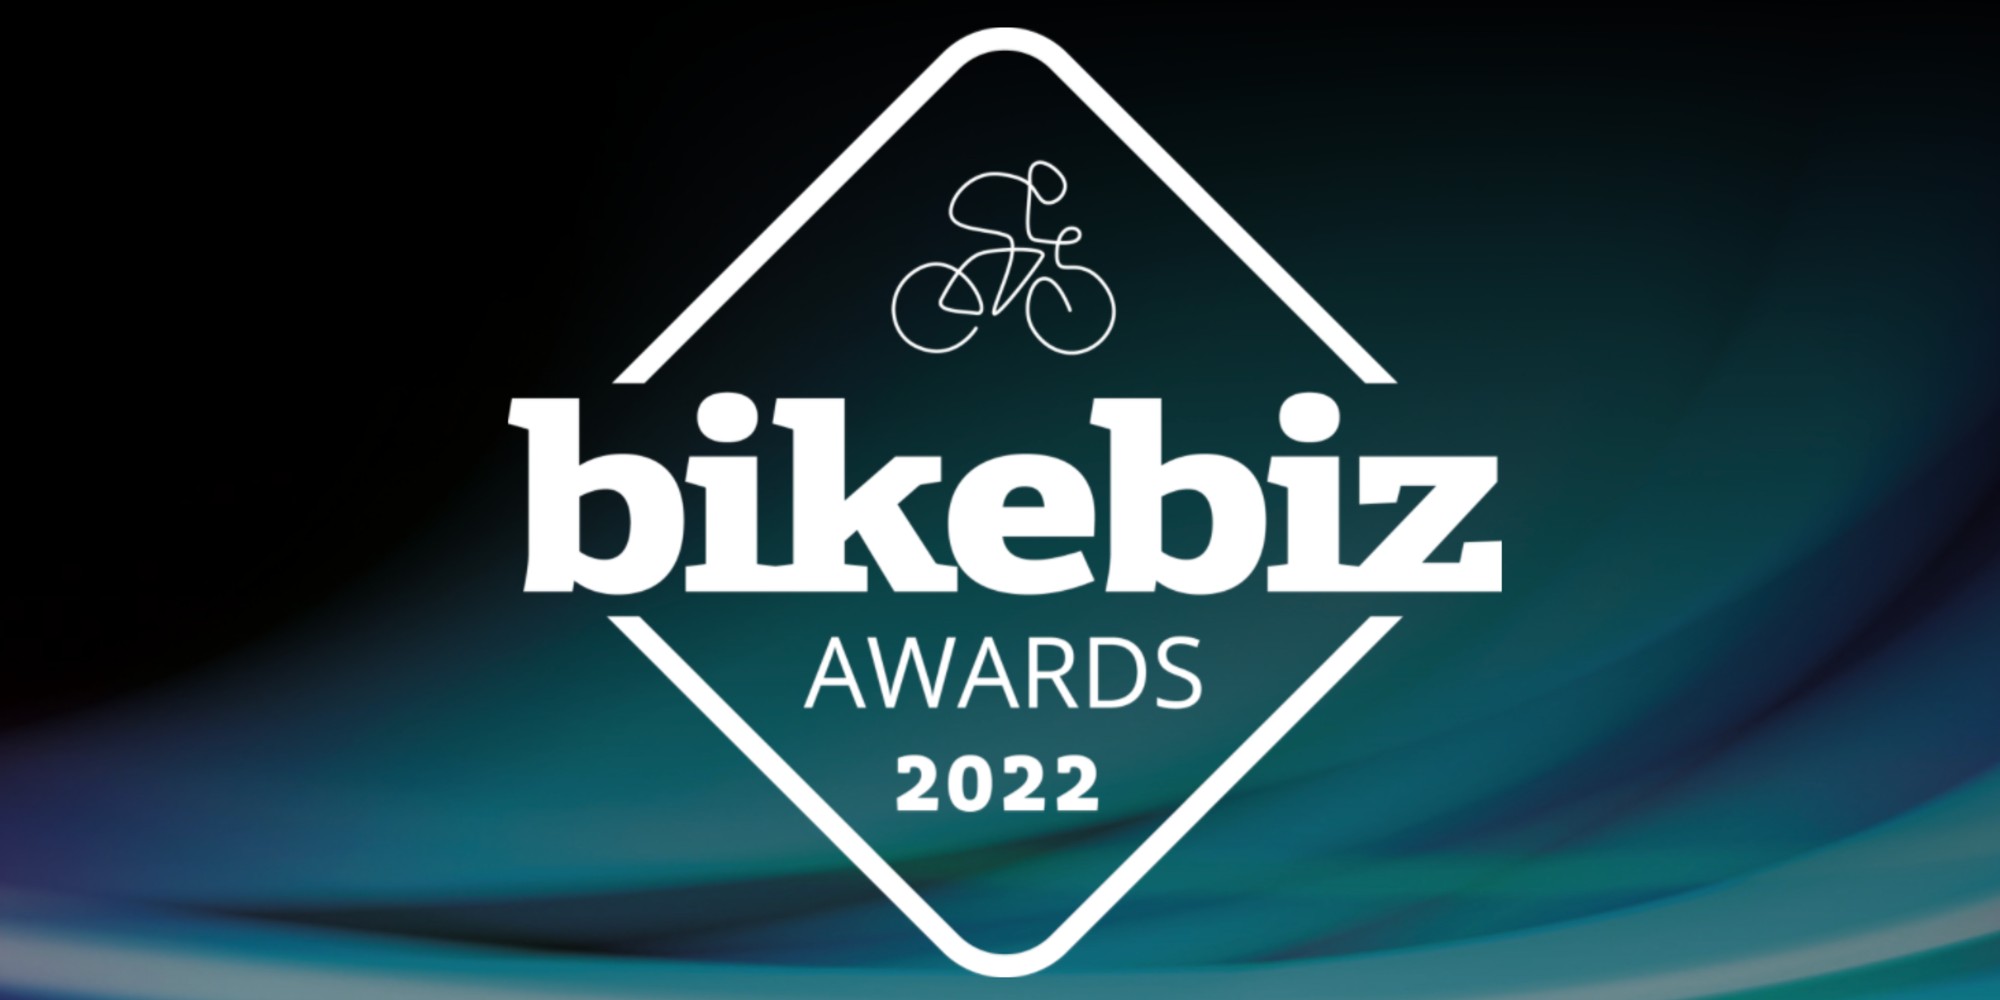 Voting closes this Friday for BikeBiz Awards 2022 in association with ArmaUrto